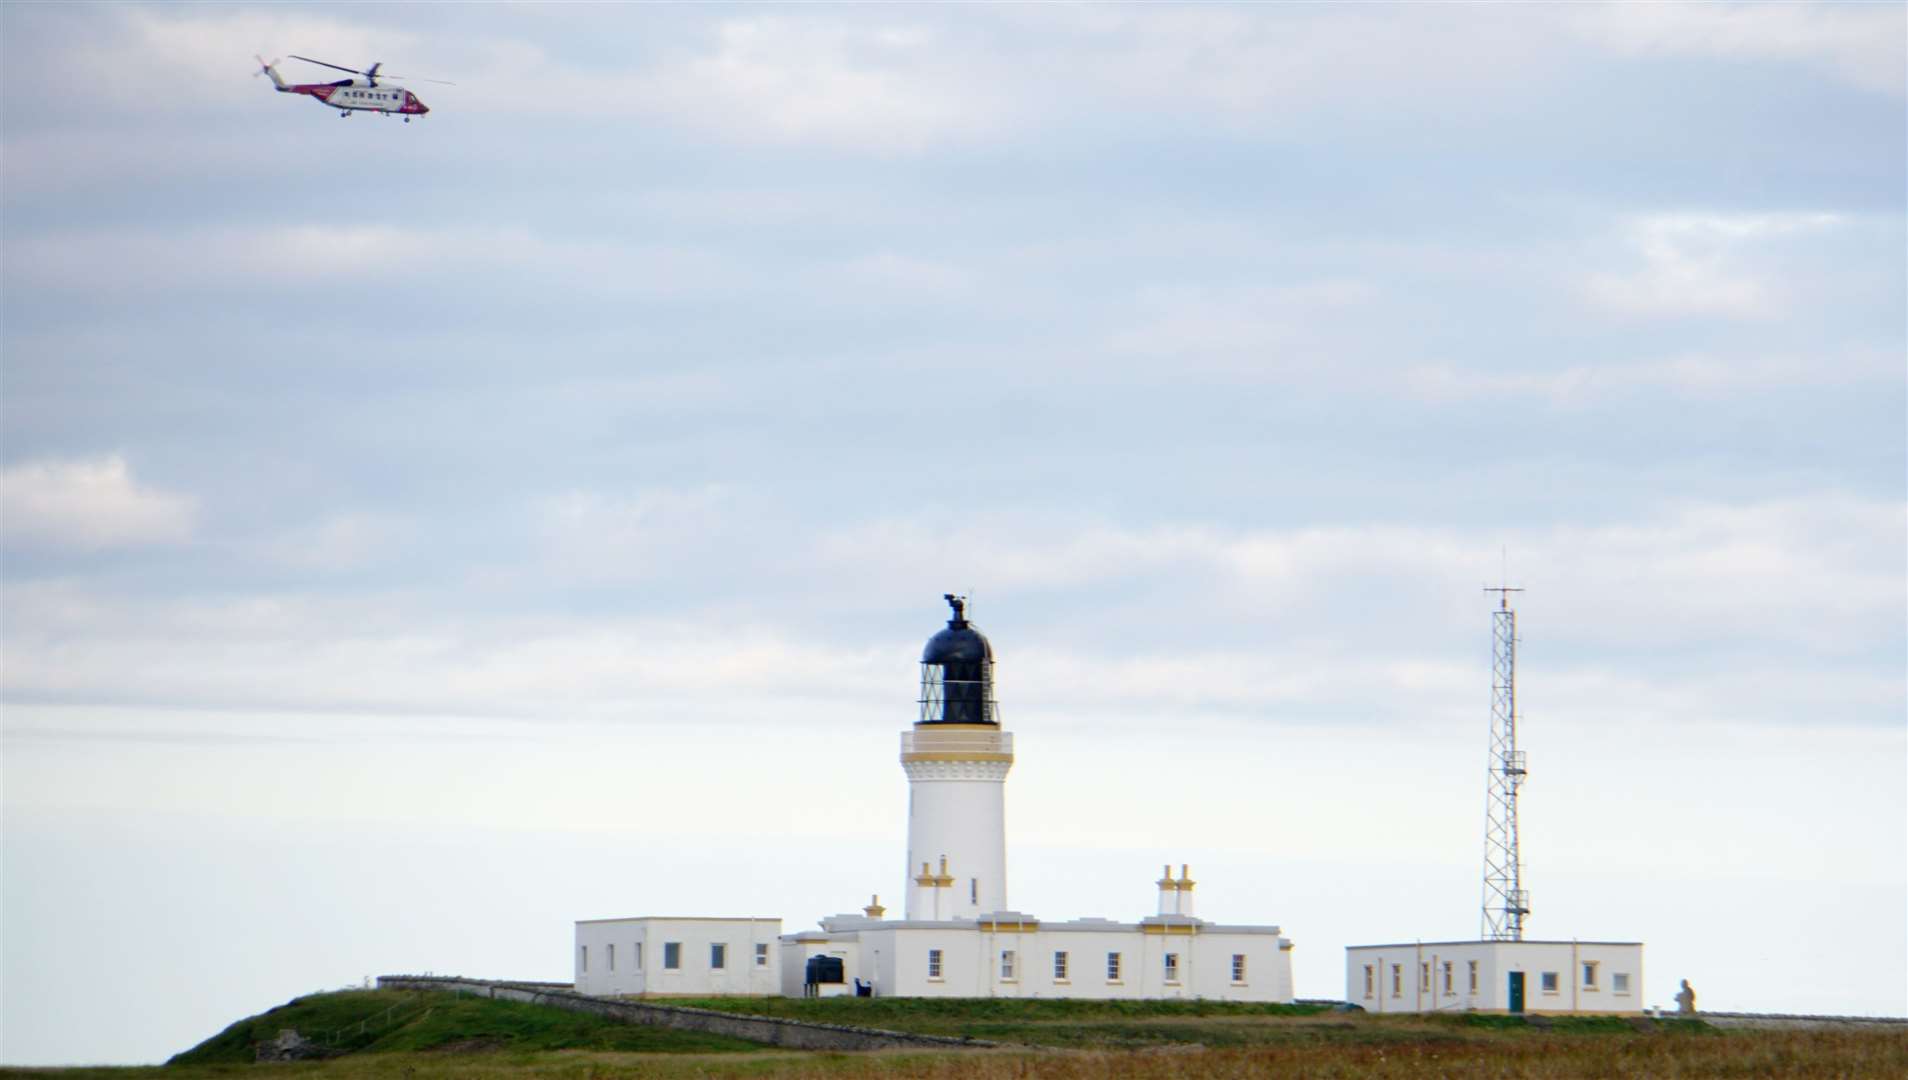 The chopper passes over Noss Head lighthouse and heads to the infirmary in Aberdeen.